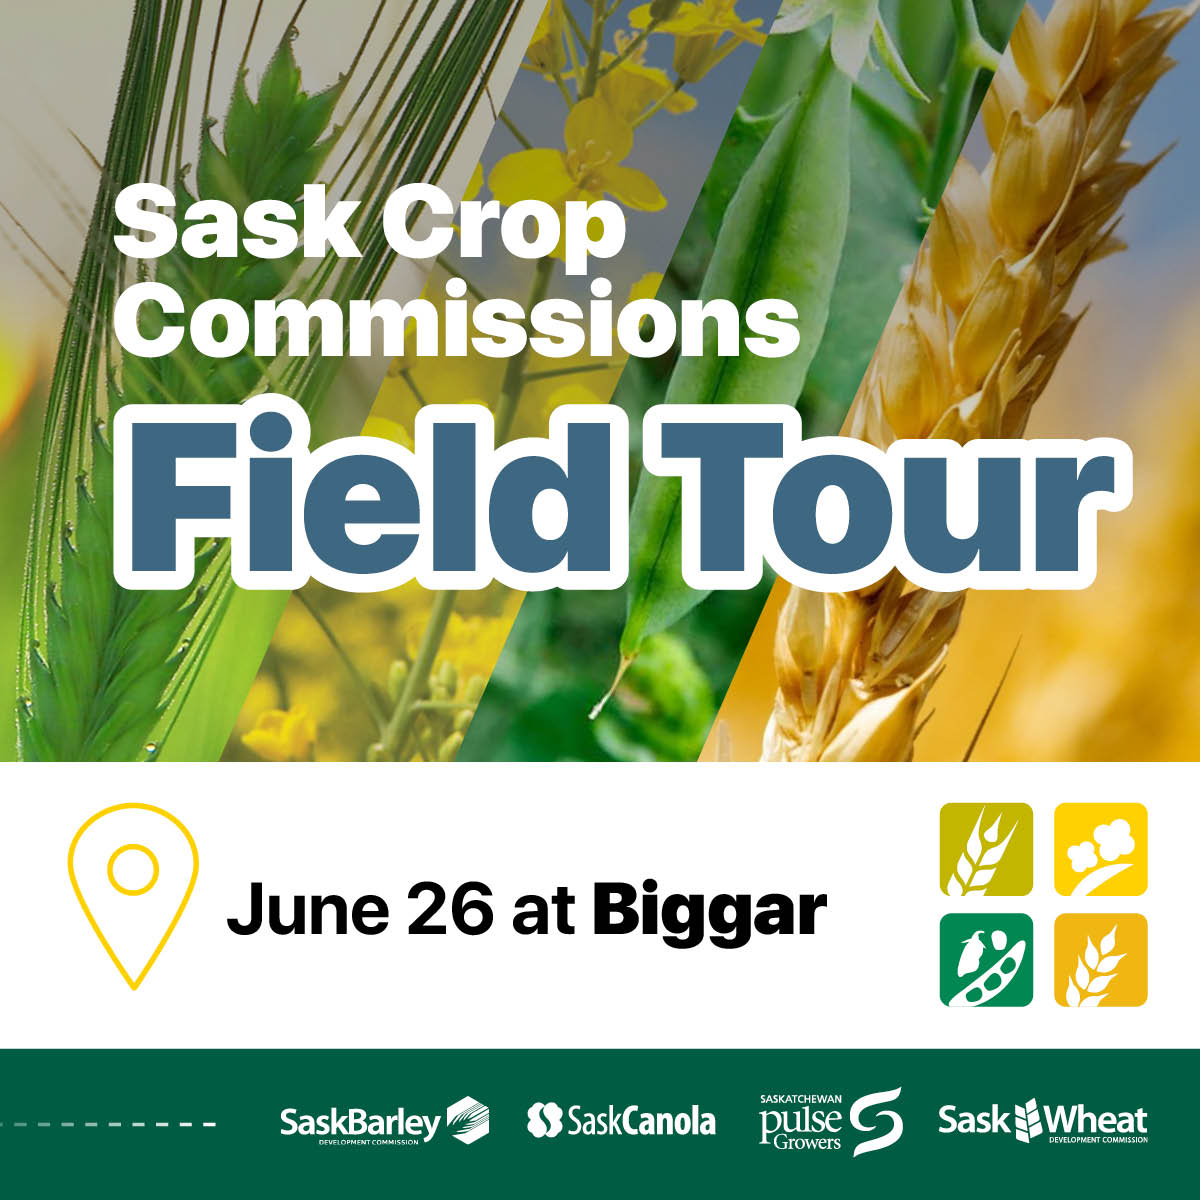 SaskPulse has partnered with @SaskBarley, @SaskCanola, and @SaskWheat to host farmers and agronomists for a tour of on-farm research trials in the Biggar area. Register for what is shaping up to be a great day of learning and networking in the field: ow.ly/f2c450RC21Y